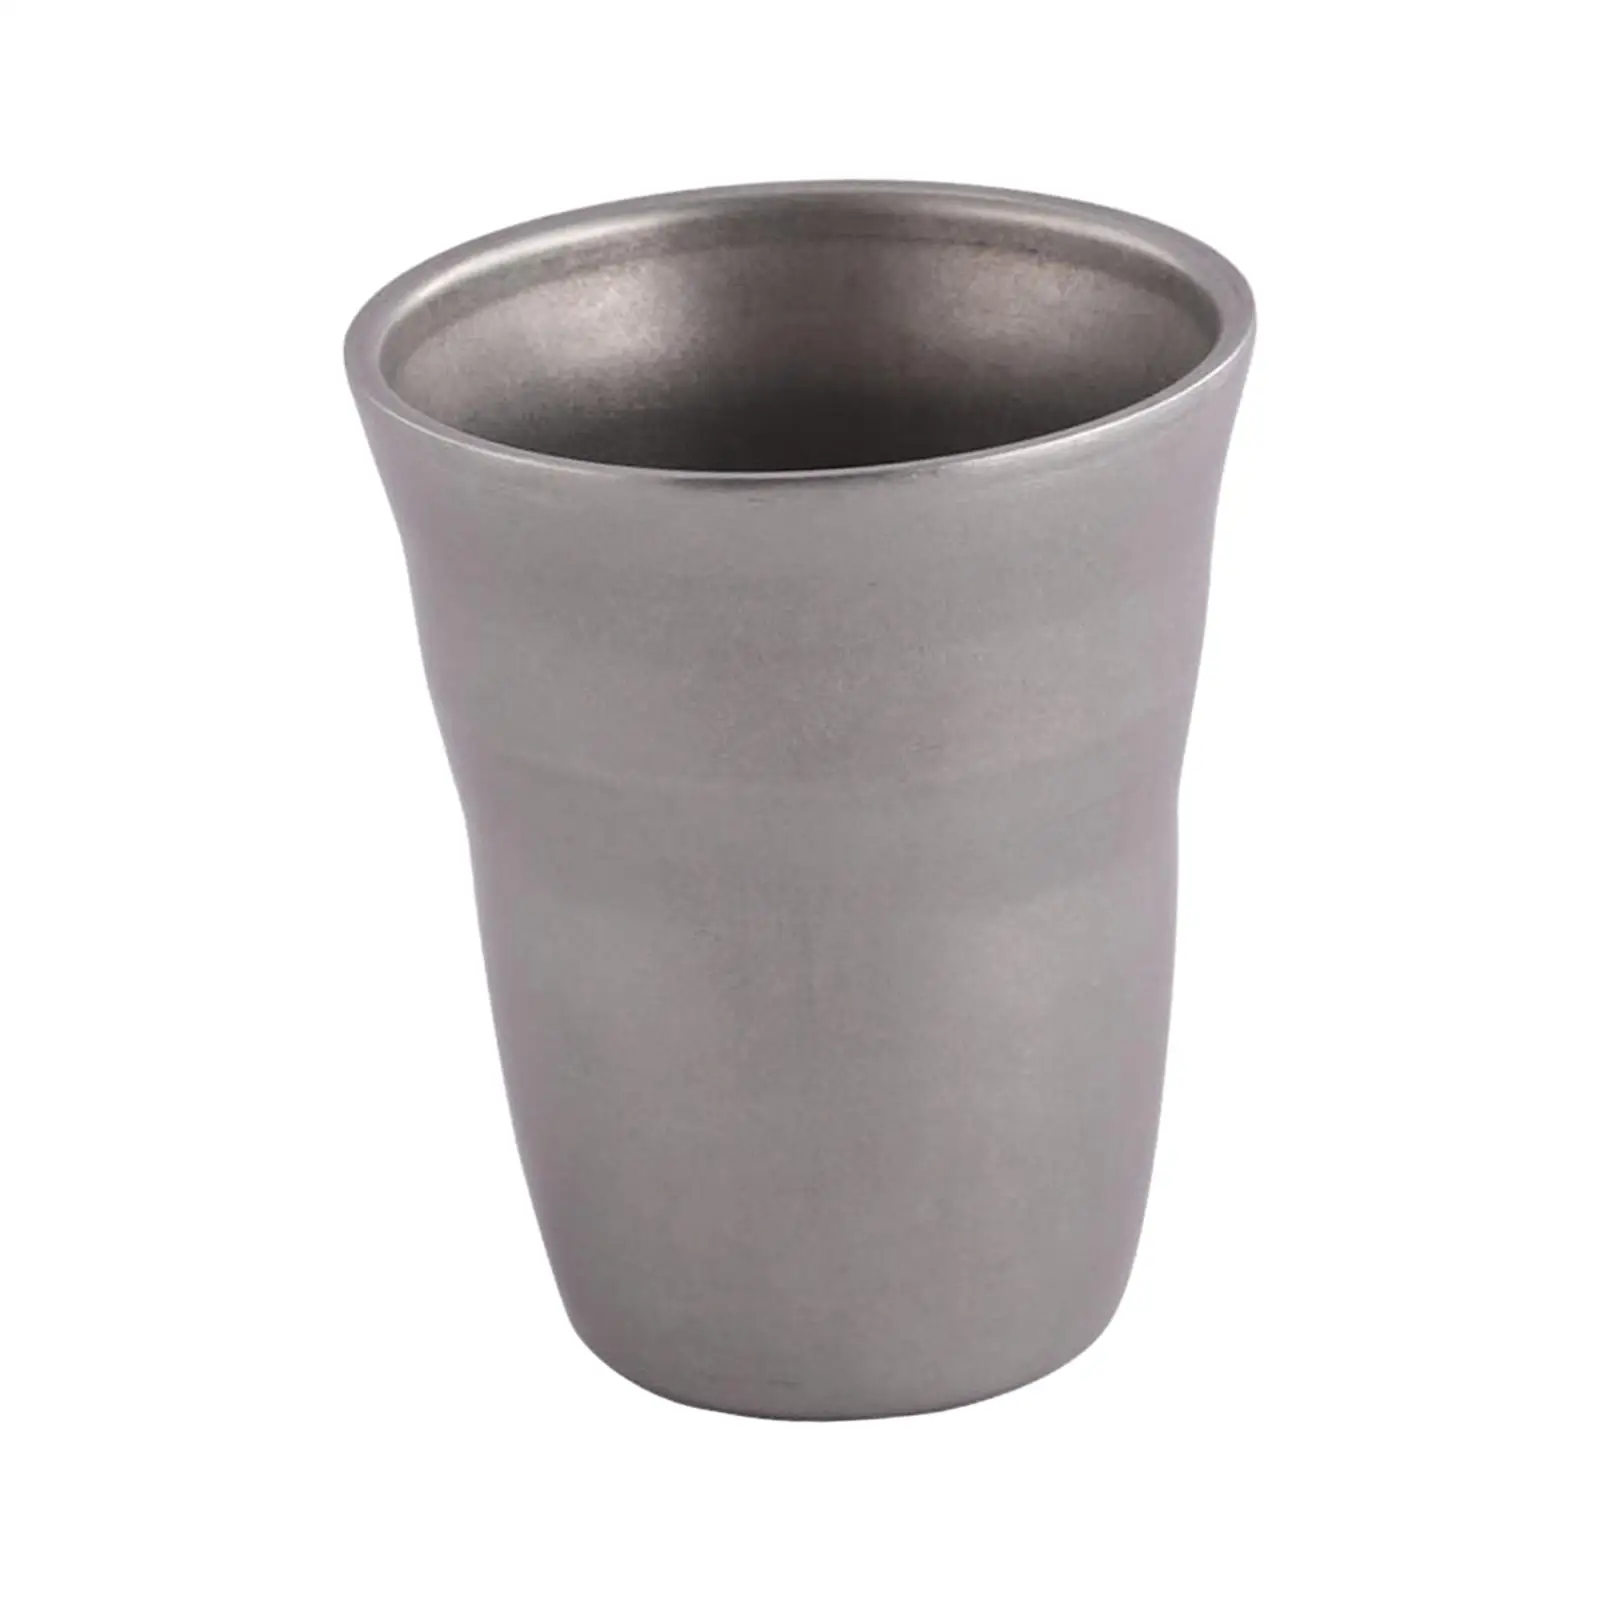 Drinking Glasses Stainless Steel Cups Camping 280ml Drink Cups Reusable Stackable Tea Water Coffee Cups Water Cup for Picnic